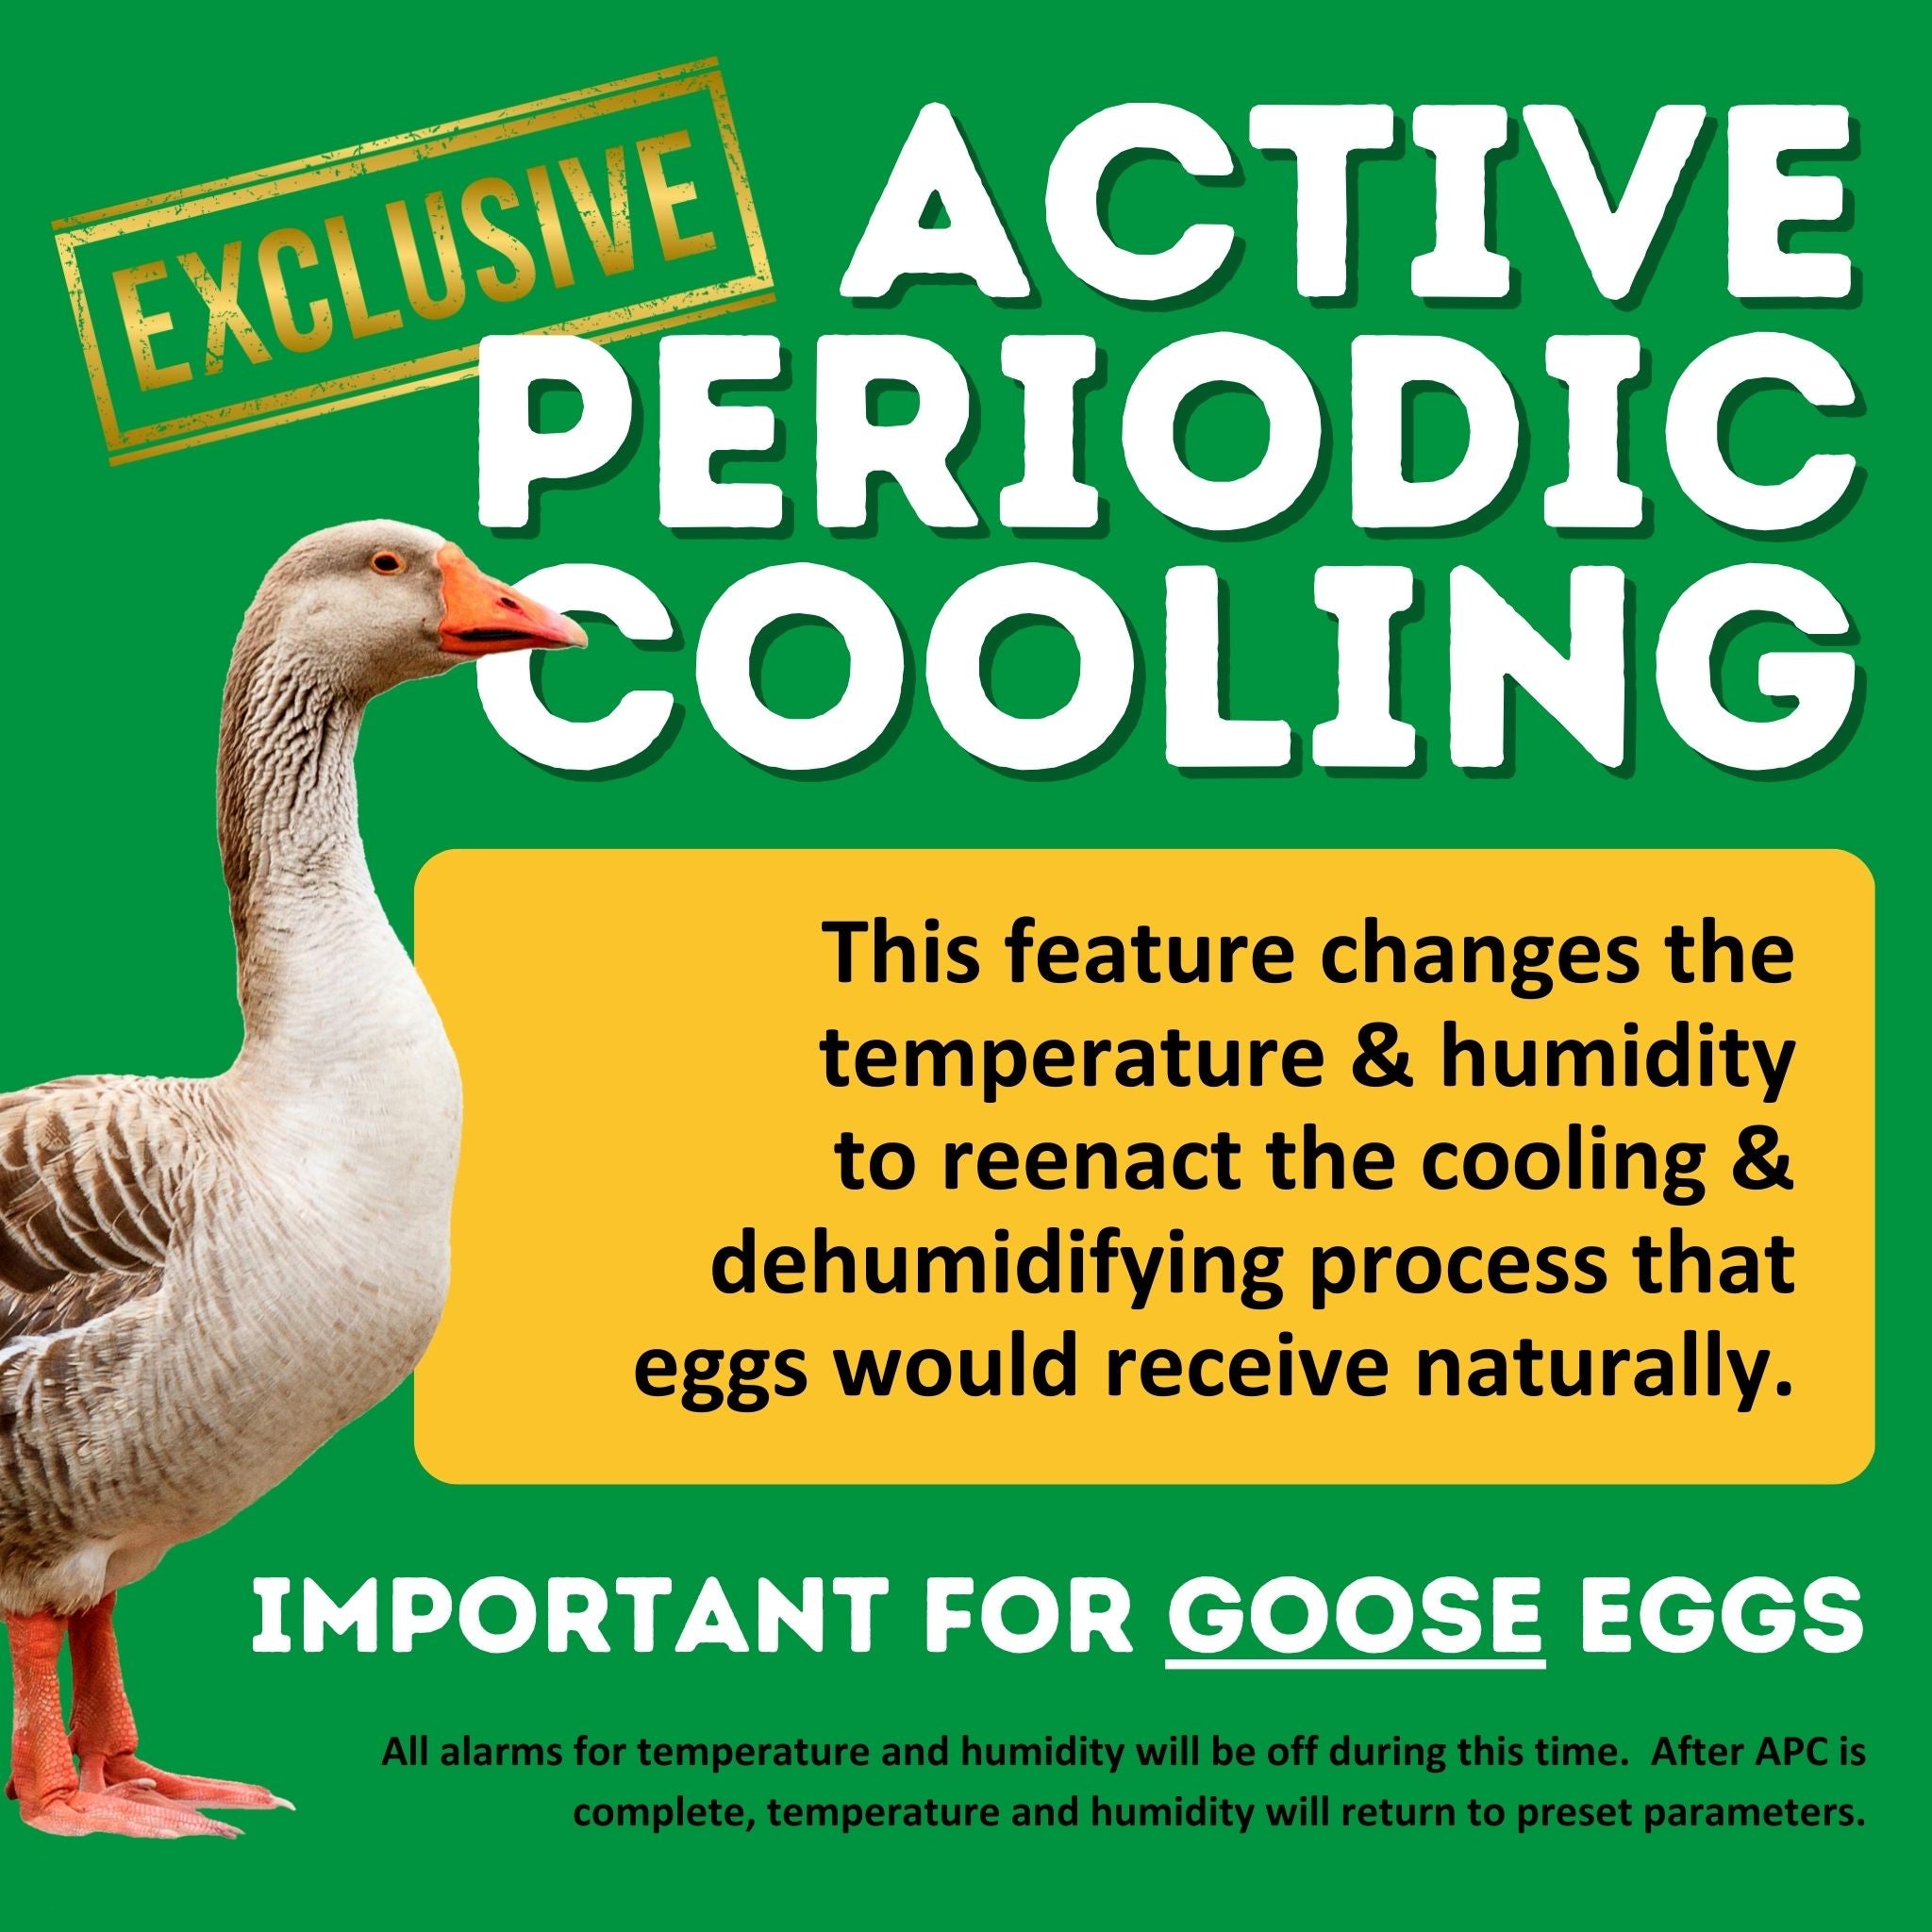 Hatching Time Cimuka. Image shows a goose standing next to the benefits of active periodic cooling which is important for Goose eggs.